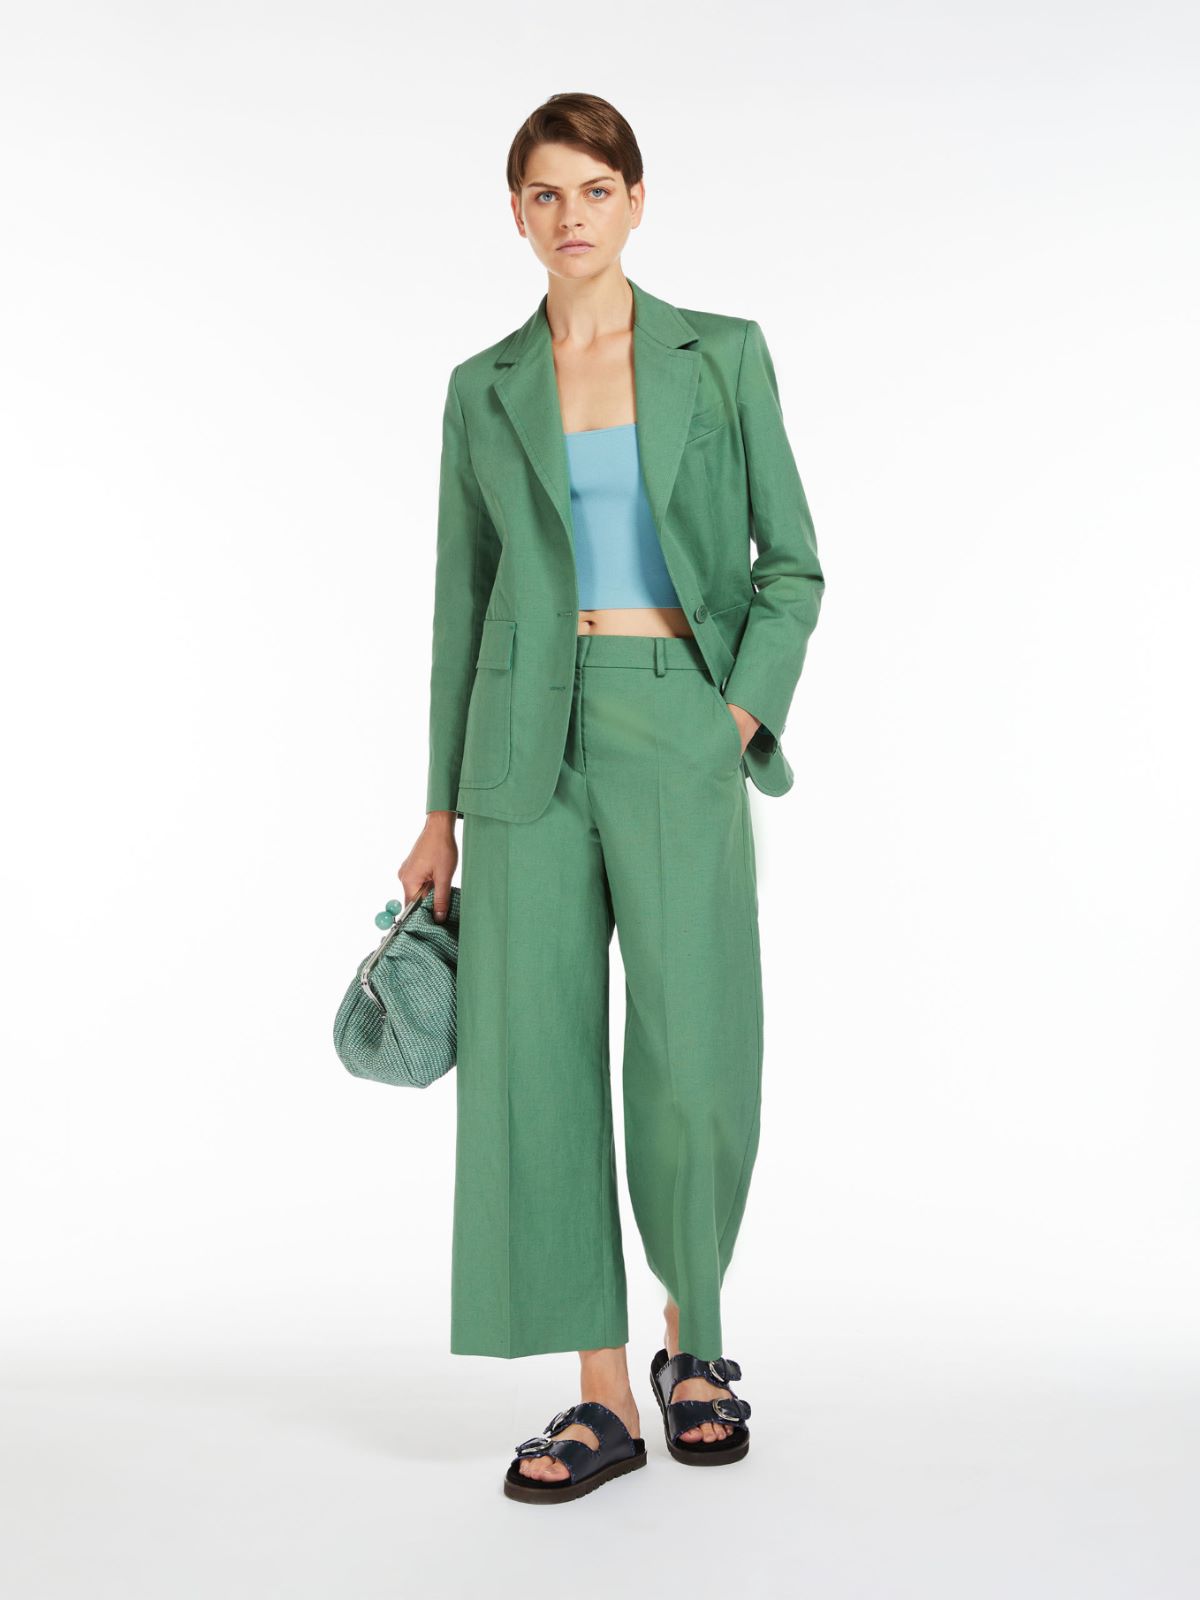 Eolie drawstring cotton and linen pants in green - Max Mara